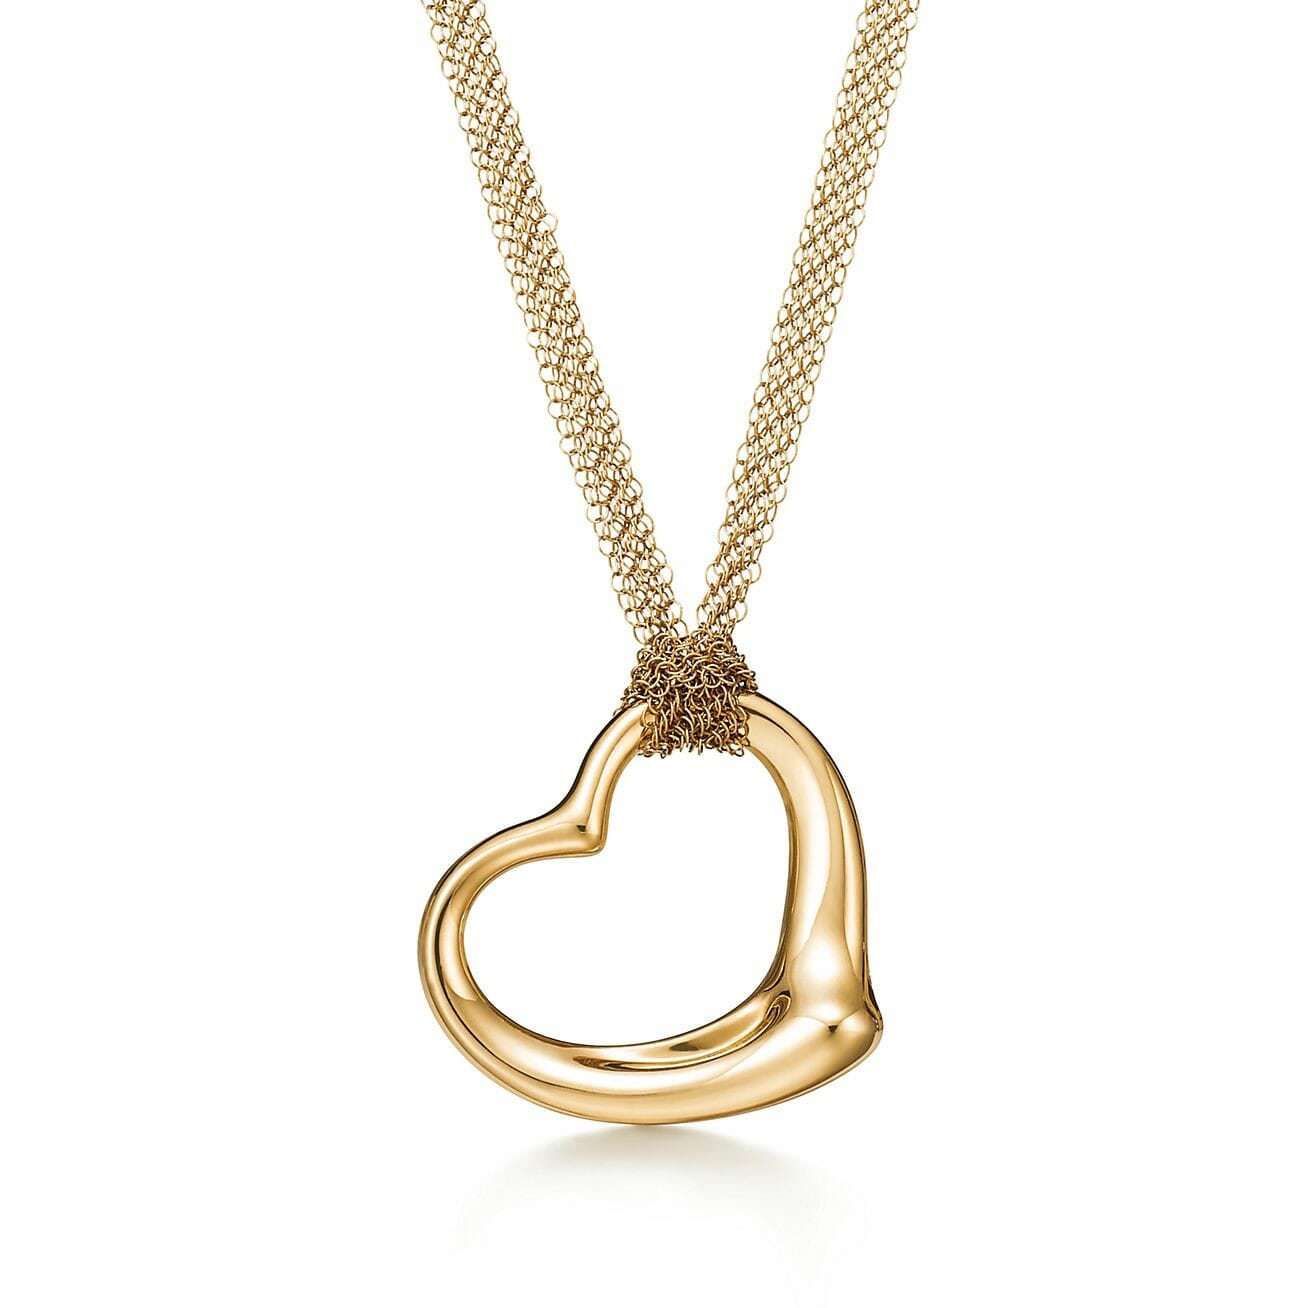 Mothers Day Gift ideas from Newport Living and Lifestyles Tiffany & Co. Elsa Peretti® heart necklace Open Heart Pendant in gold &5200